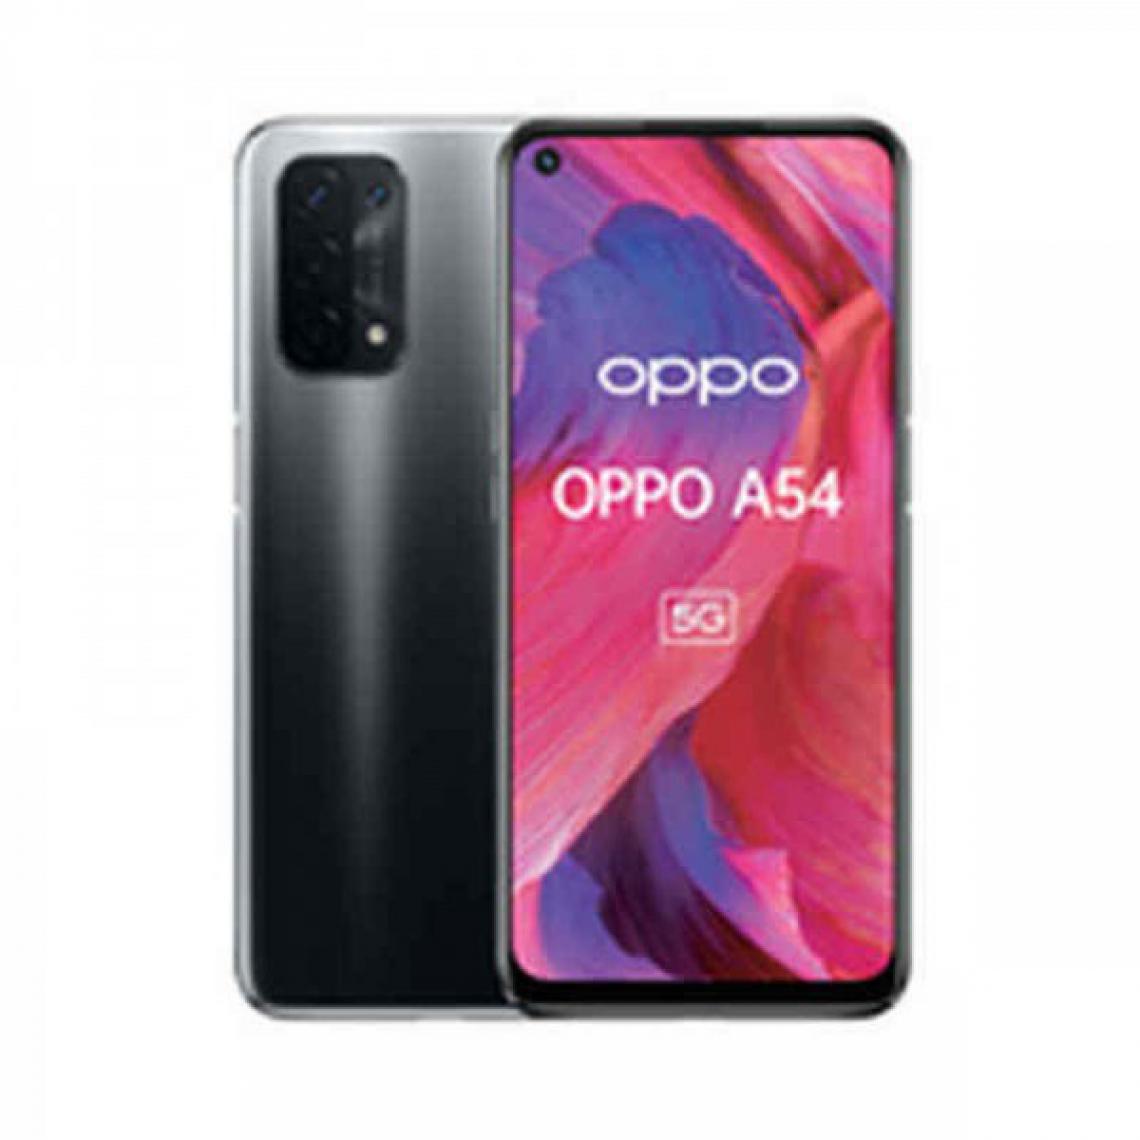 Oppo - Smartphone Oppo A54 5G - Smartphone Android